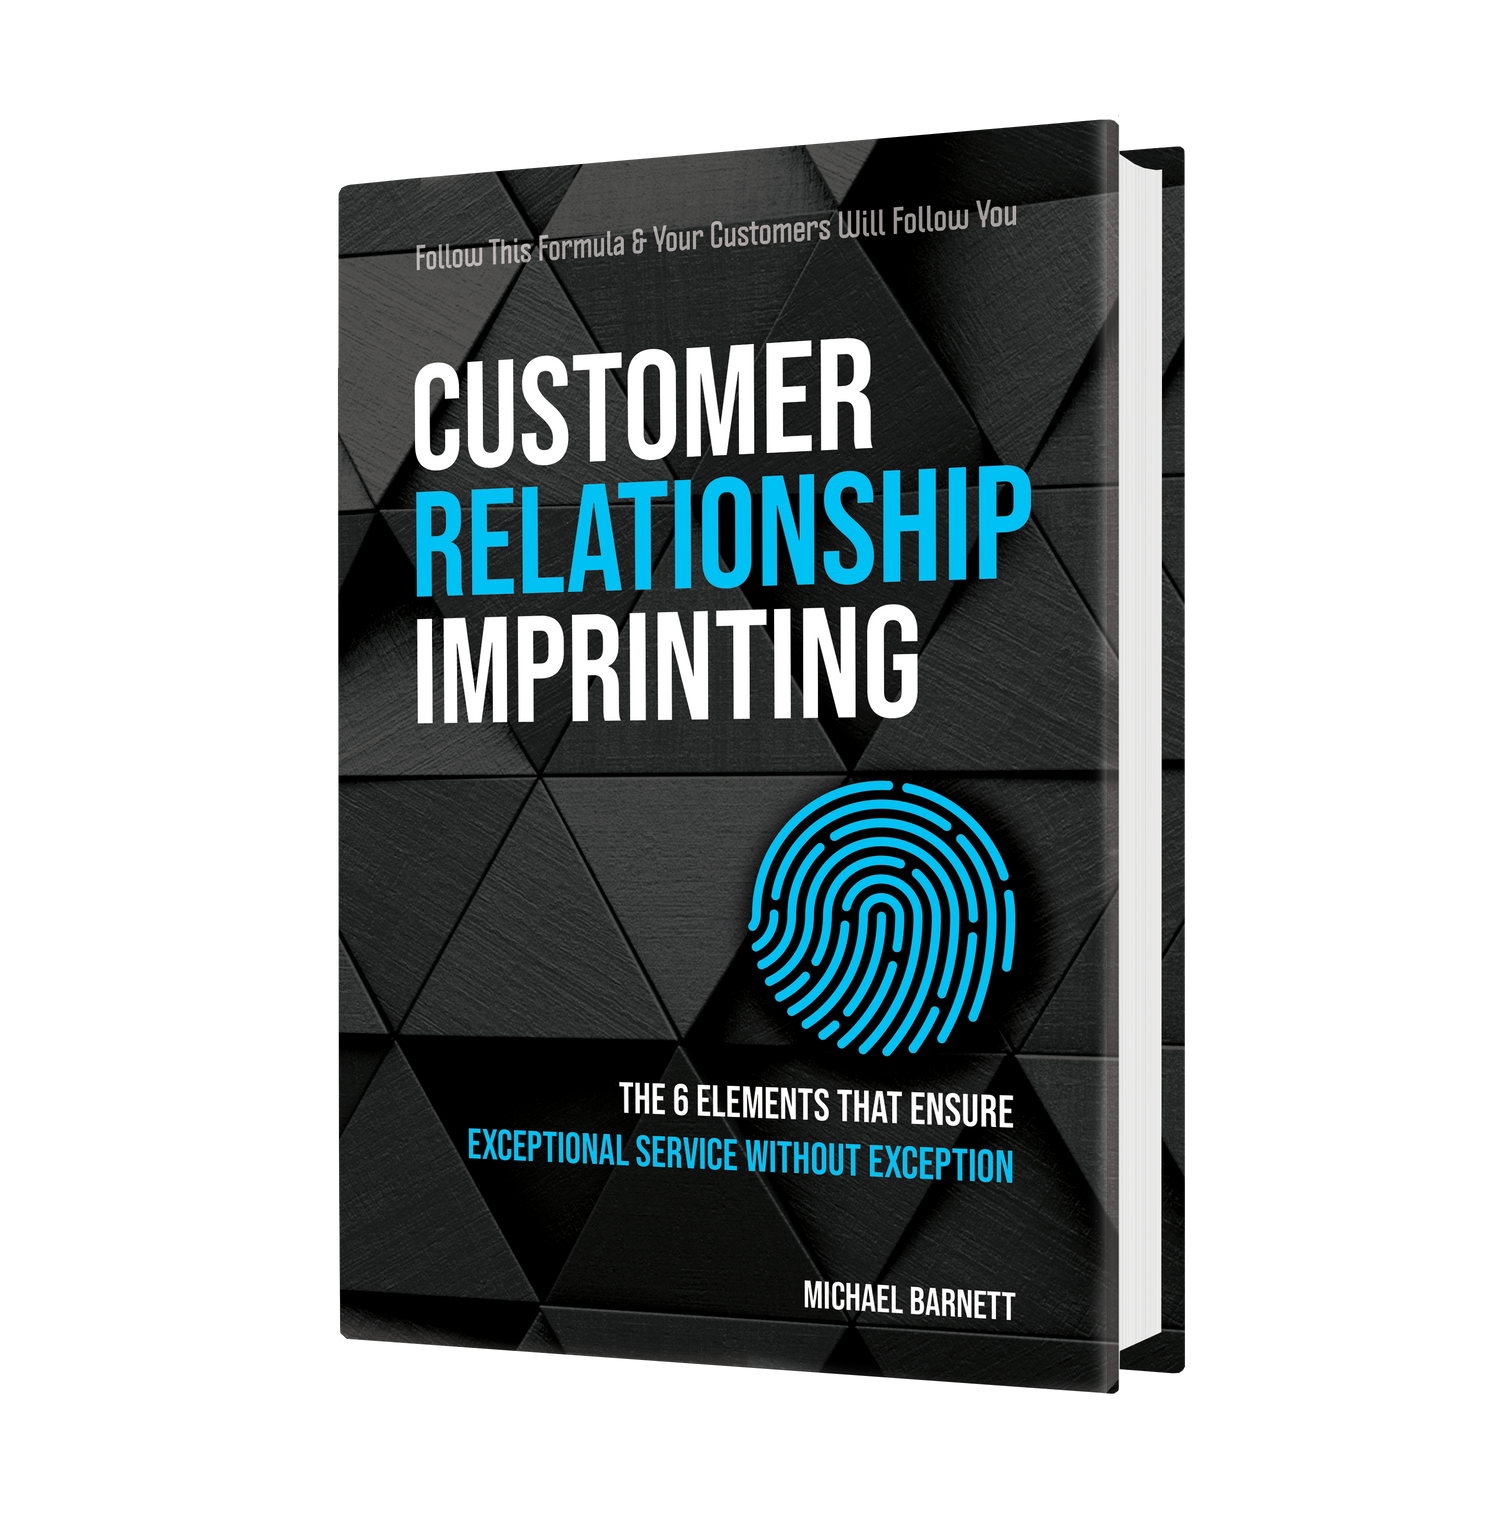 customer relationship imprinting soft cover book